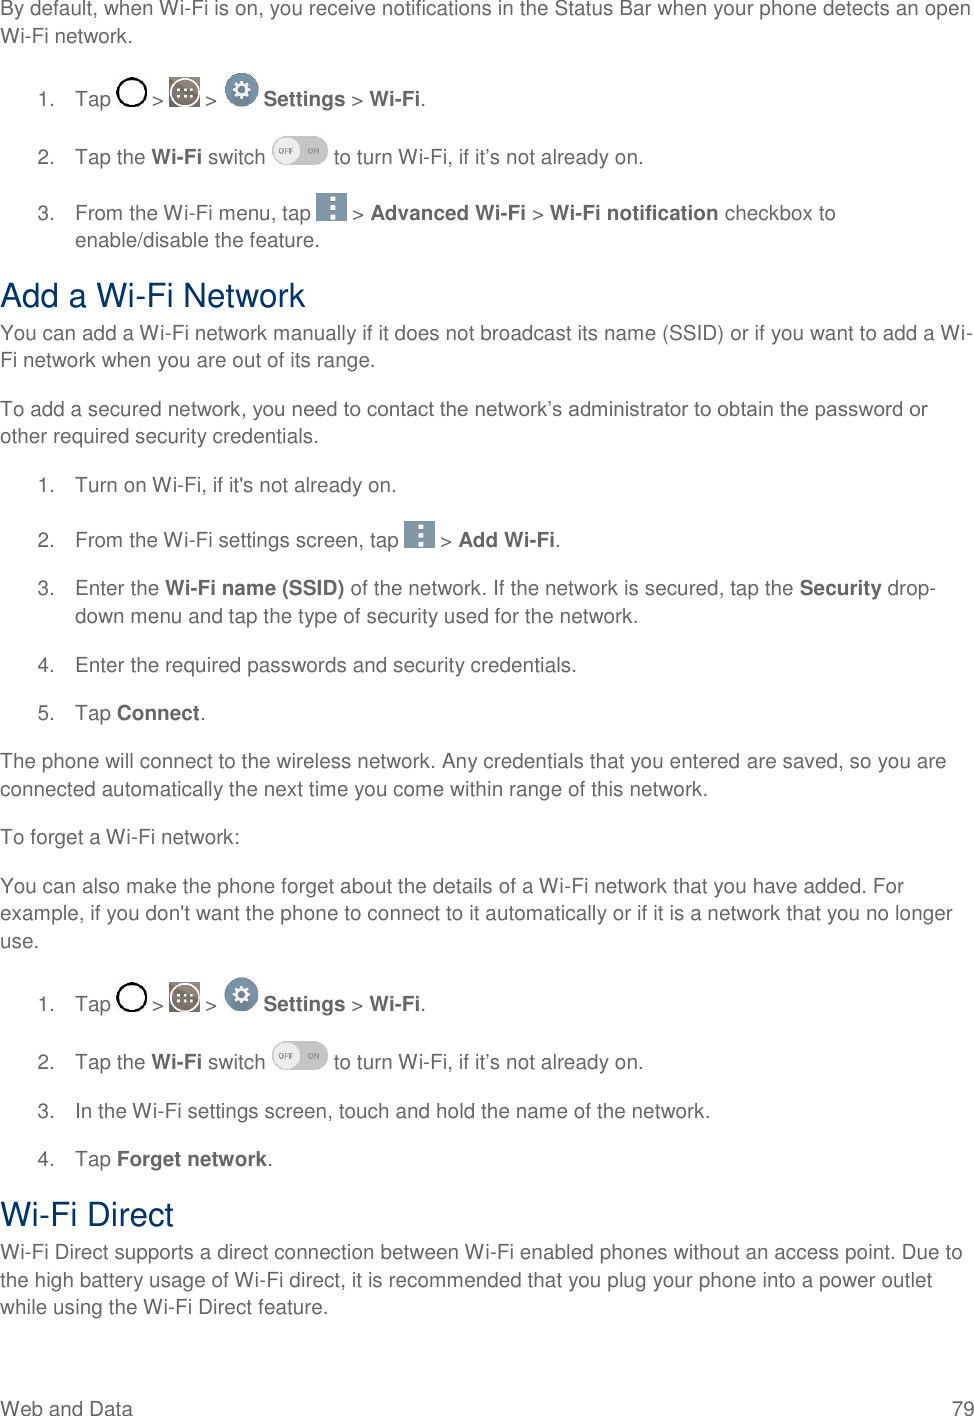 Web and Data  79 By default, when Wi-Fi is on, you receive notifications in the Status Bar when your phone detects an open Wi-Fi network. 1.  Tap   &gt;   &gt;   Settings &gt; Wi-Fi. 2.  Tap the Wi-Fi switch   to turn Wi-Fi, if it‘s not already on.  3.  From the Wi-Fi menu, tap   &gt; Advanced Wi-Fi &gt; Wi-Fi notification checkbox to enable/disable the feature.  Add a Wi-Fi Network You can add a Wi-Fi network manually if it does not broadcast its name (SSID) or if you want to add a Wi-Fi network when you are out of its range. To add a secured network, you need to contact the network‘s administrator to obtain the password or other required security credentials. 1.  Turn on Wi-Fi, if it&apos;s not already on. 2.  From the Wi-Fi settings screen, tap   &gt; Add Wi-Fi. 3.  Enter the Wi-Fi name (SSID) of the network. If the network is secured, tap the Security drop-down menu and tap the type of security used for the network. 4.  Enter the required passwords and security credentials. 5.  Tap Connect. The phone will connect to the wireless network. Any credentials that you entered are saved, so you are connected automatically the next time you come within range of this network. To forget a Wi-Fi network: You can also make the phone forget about the details of a Wi-Fi network that you have added. For example, if you don&apos;t want the phone to connect to it automatically or if it is a network that you no longer use. 1.  Tap   &gt;   &gt;   Settings &gt; Wi-Fi. 2.  Tap the Wi-Fi switch   to turn Wi-Fi, if it‘s not already on.  3.  In the Wi-Fi settings screen, touch and hold the name of the network. 4.  Tap Forget network. Wi-Fi Direct Wi-Fi Direct supports a direct connection between Wi-Fi enabled phones without an access point. Due to the high battery usage of Wi-Fi direct, it is recommended that you plug your phone into a power outlet while using the Wi-Fi Direct feature. 